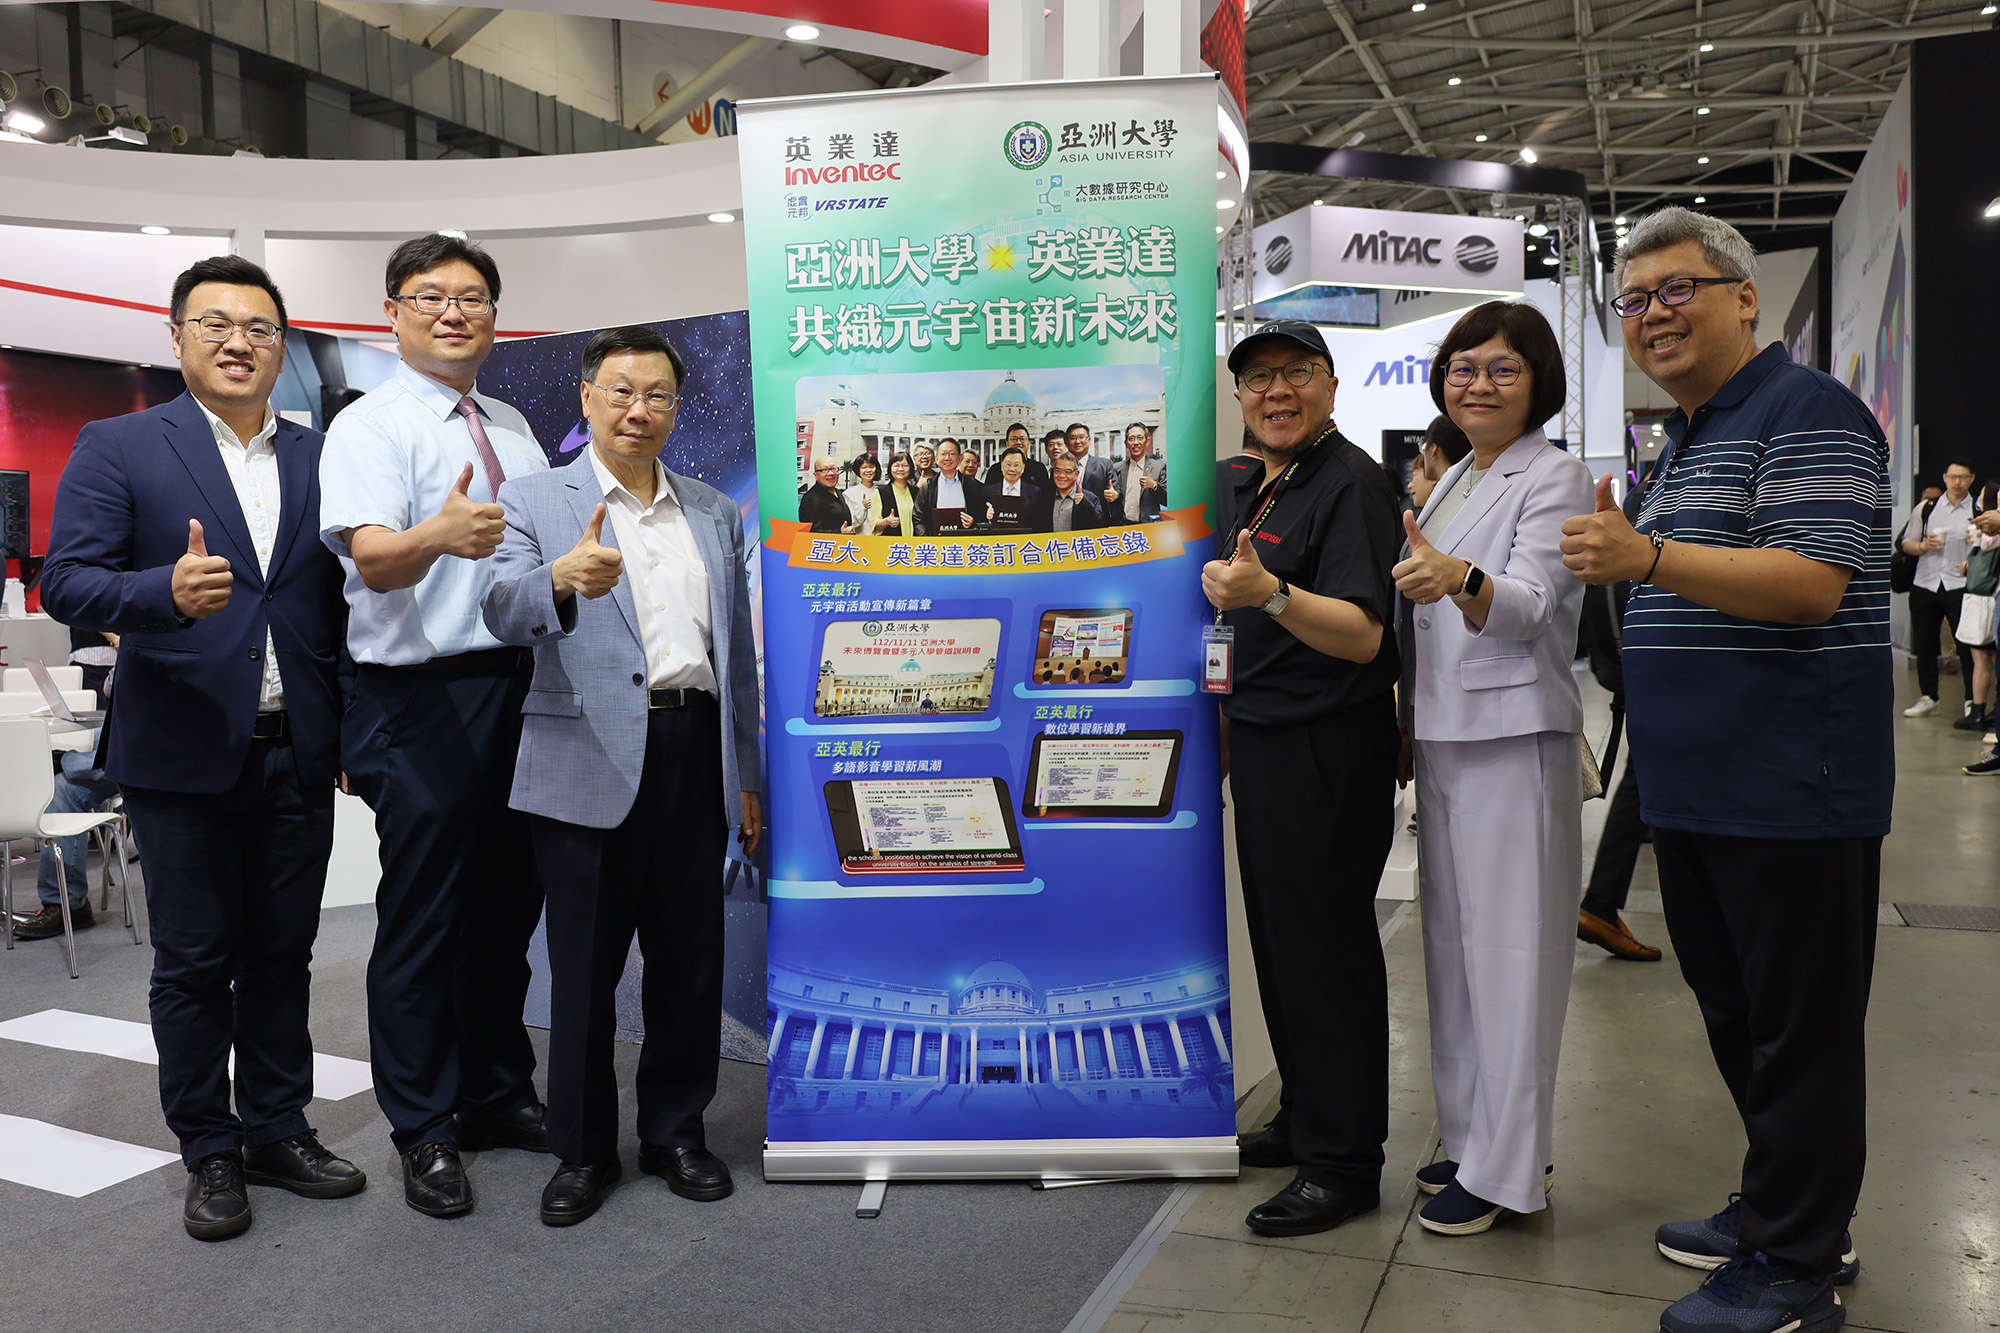 Inventec 's display at the Computex booth, showcasing their collaboration with Asia University on the "Metaverse Campus." Asia University President Jeffrey J.P. Tsai (left 3) is pictured with university officials and Inventec 's Senior Manager of Metaverse Technology Division, Lin Chao-Liang (right 3).